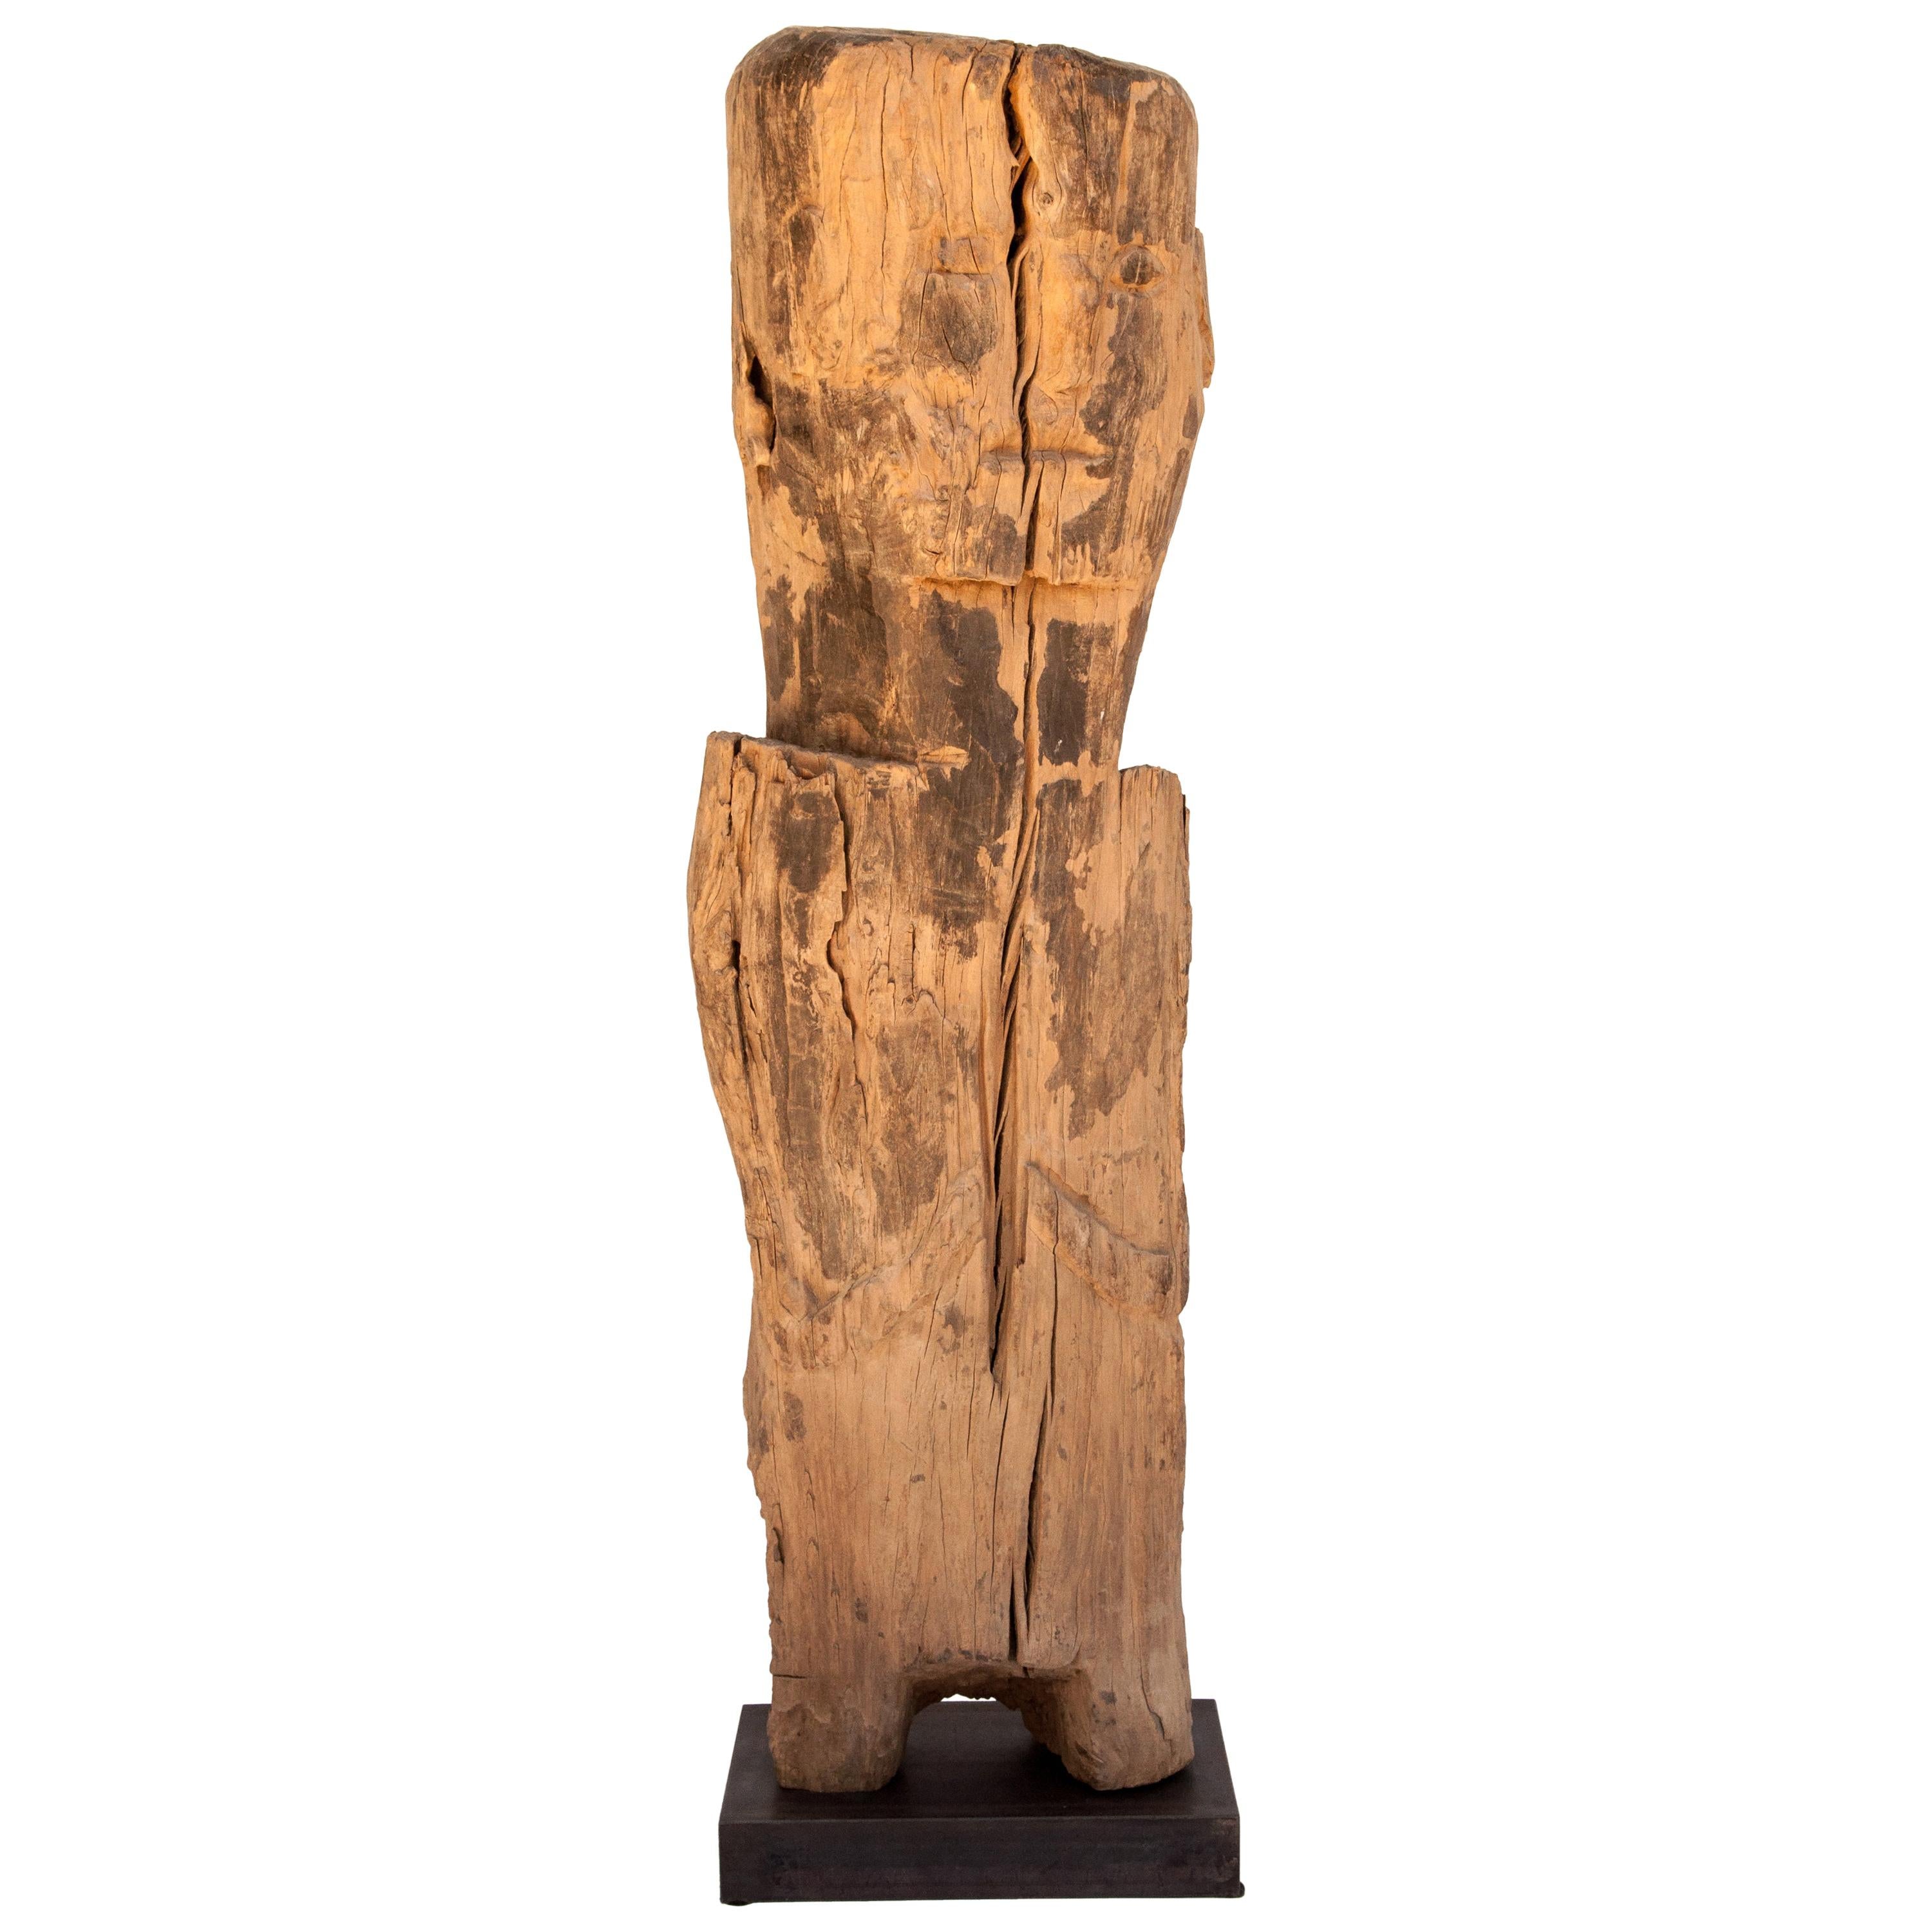 Wooden Tribal Statue or Bridge Figure from West Nepal, Early to Mid-20th Century